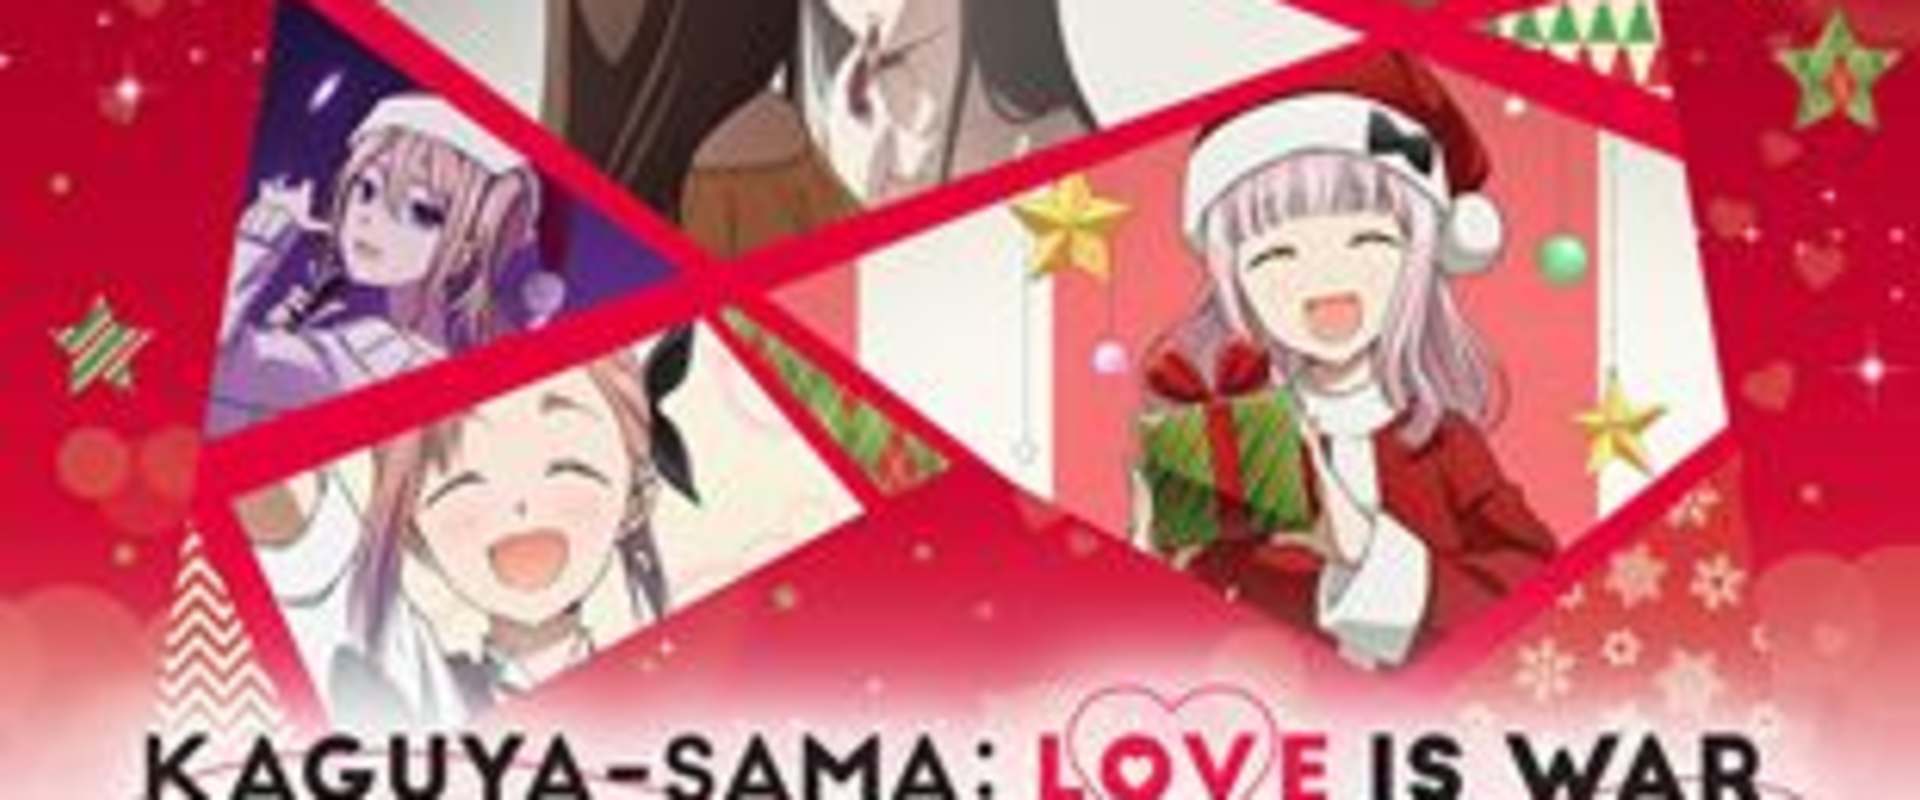 Kaguya-sama: Love Is War -The First Kiss That Never Ends- background 2